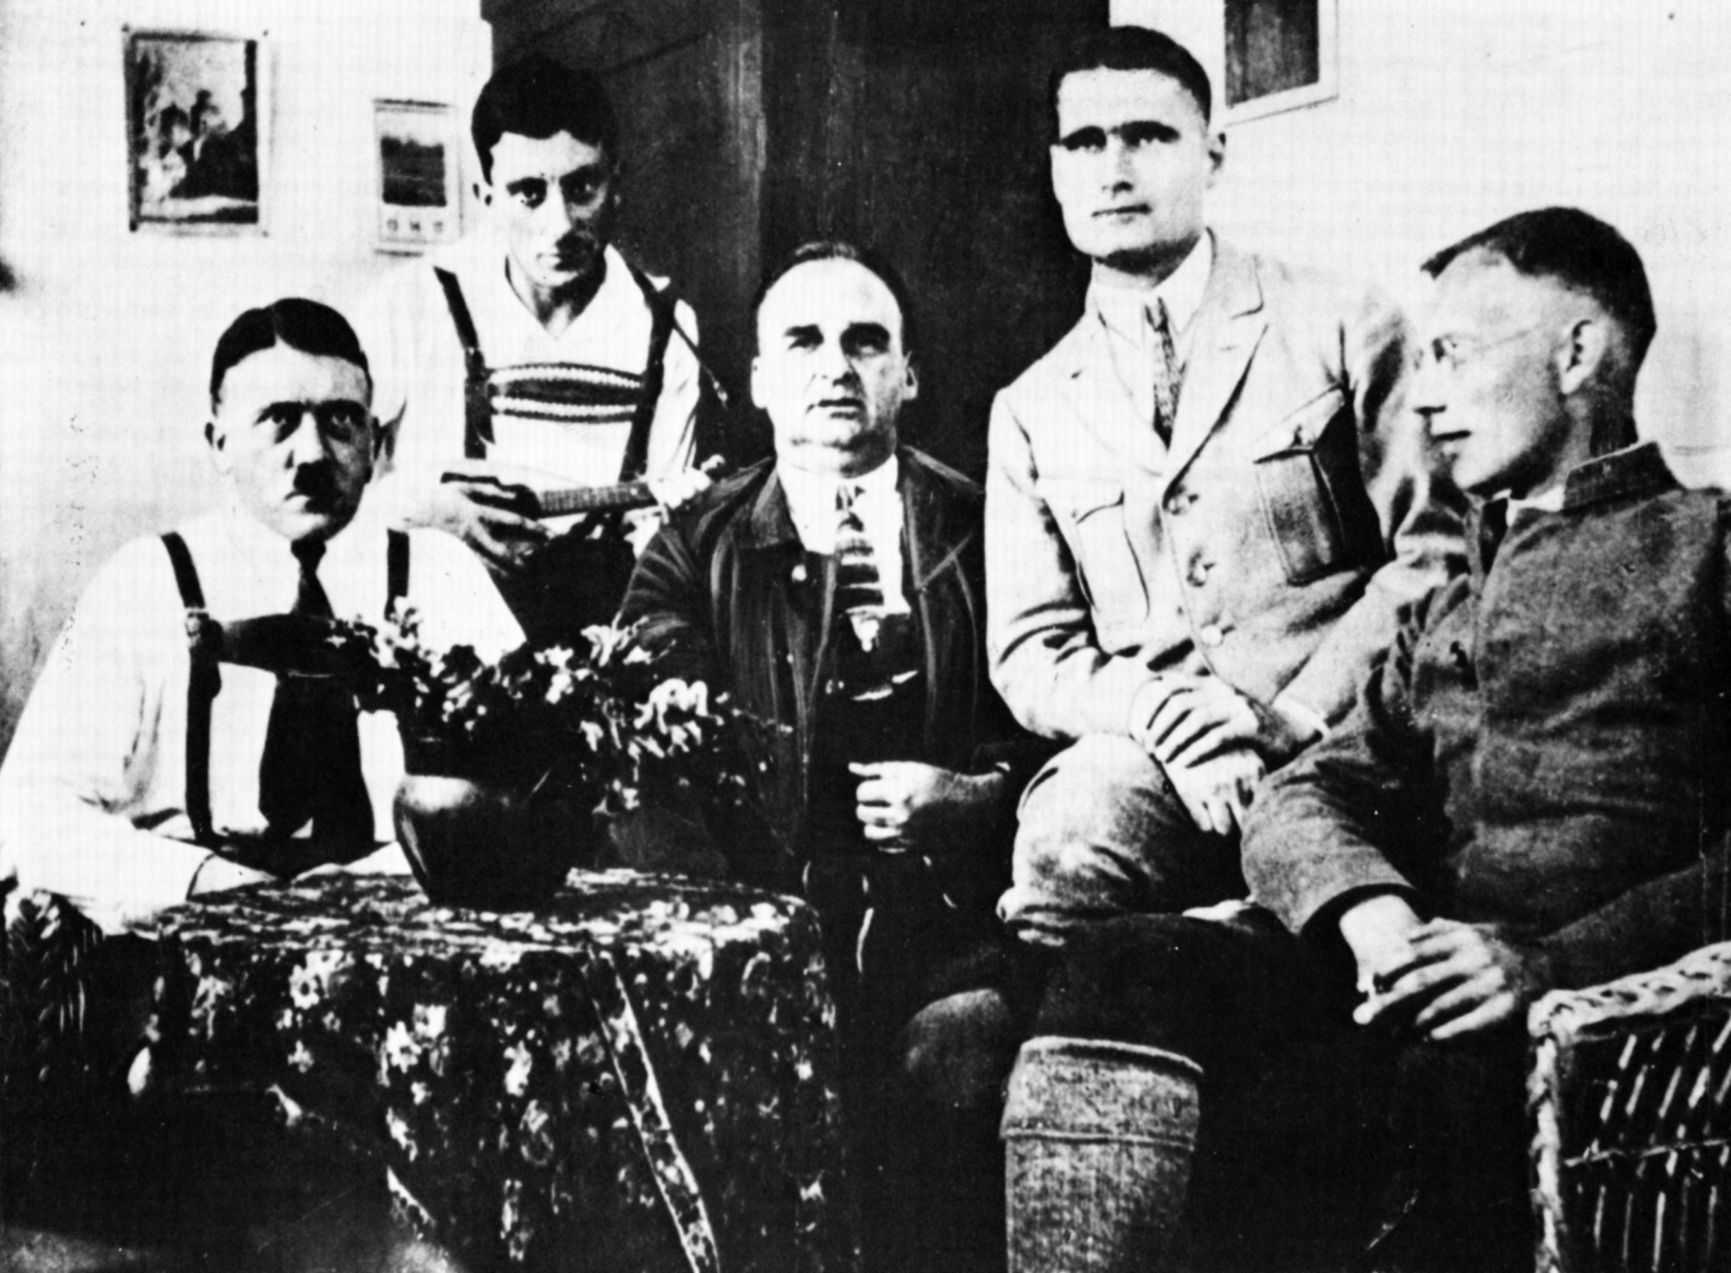 While incarcerated in Landsberg Prison, Hitler poses with Hess, his trusted secretary, and three other Nazis. Hitler’s time in prison was something less than oppressive. The guards were Nazi sympathizers and allowed him to have numerous visitors and flowers in his cell.